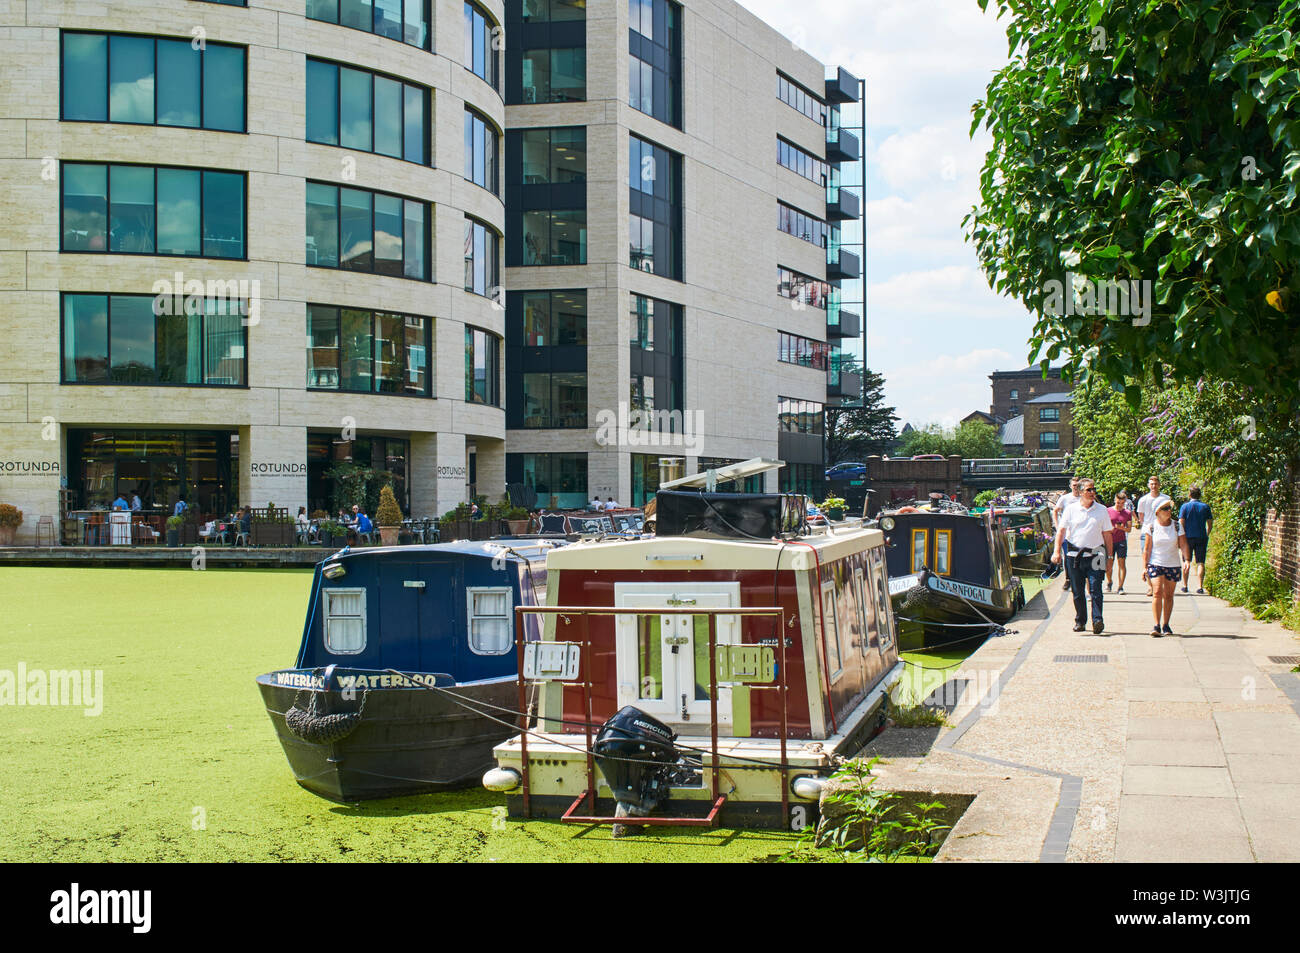 The Regents Canal at King's Cross, London UK, with narrowboats and new apartment buildings Stock Photo